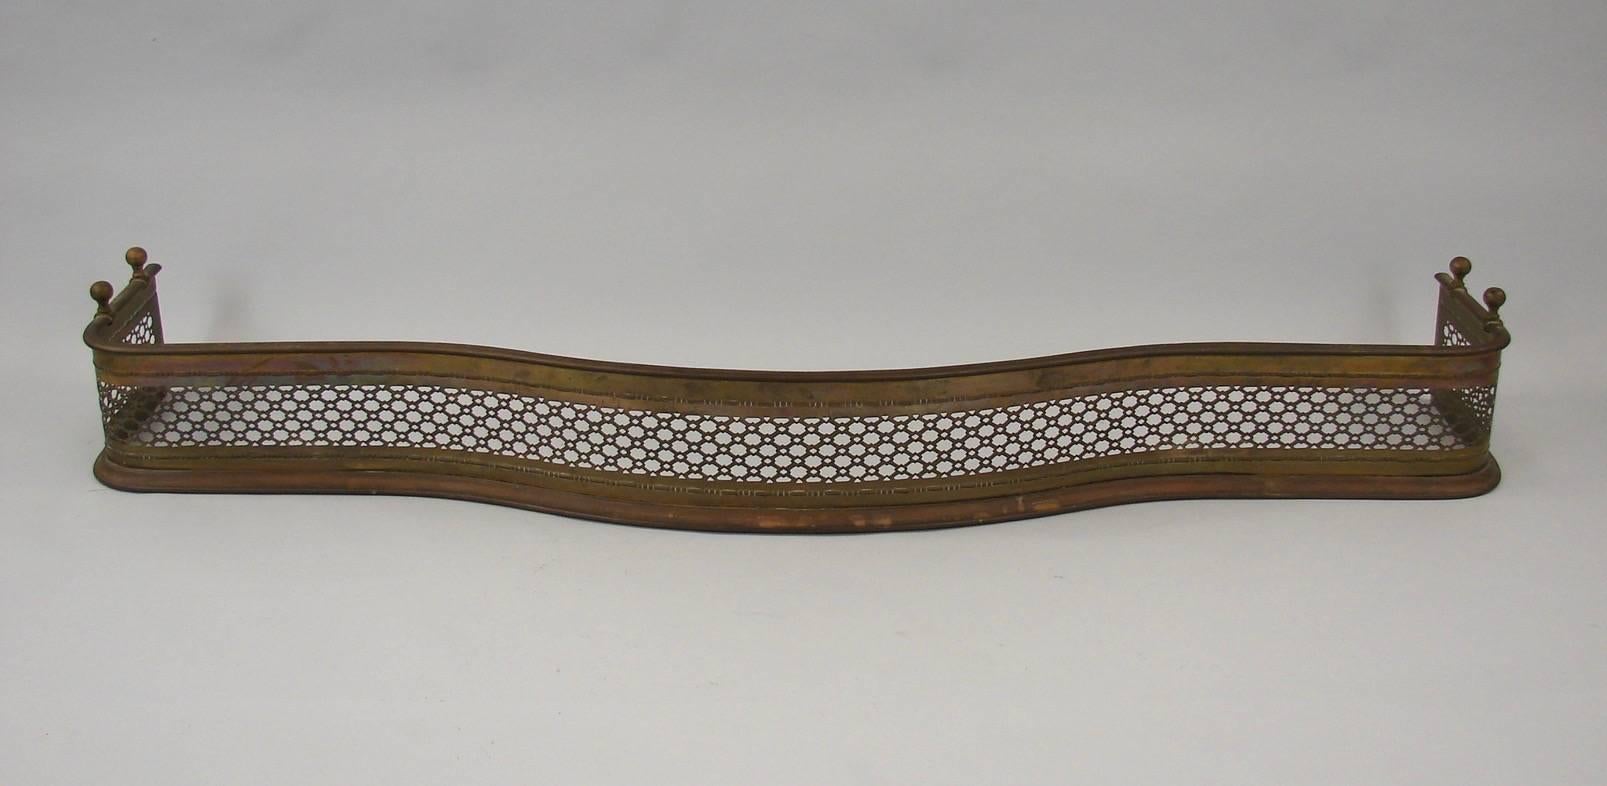 An English brass fireplace set consisting of a large serpentine grillwork fender, three tools and a pair of firedogs.